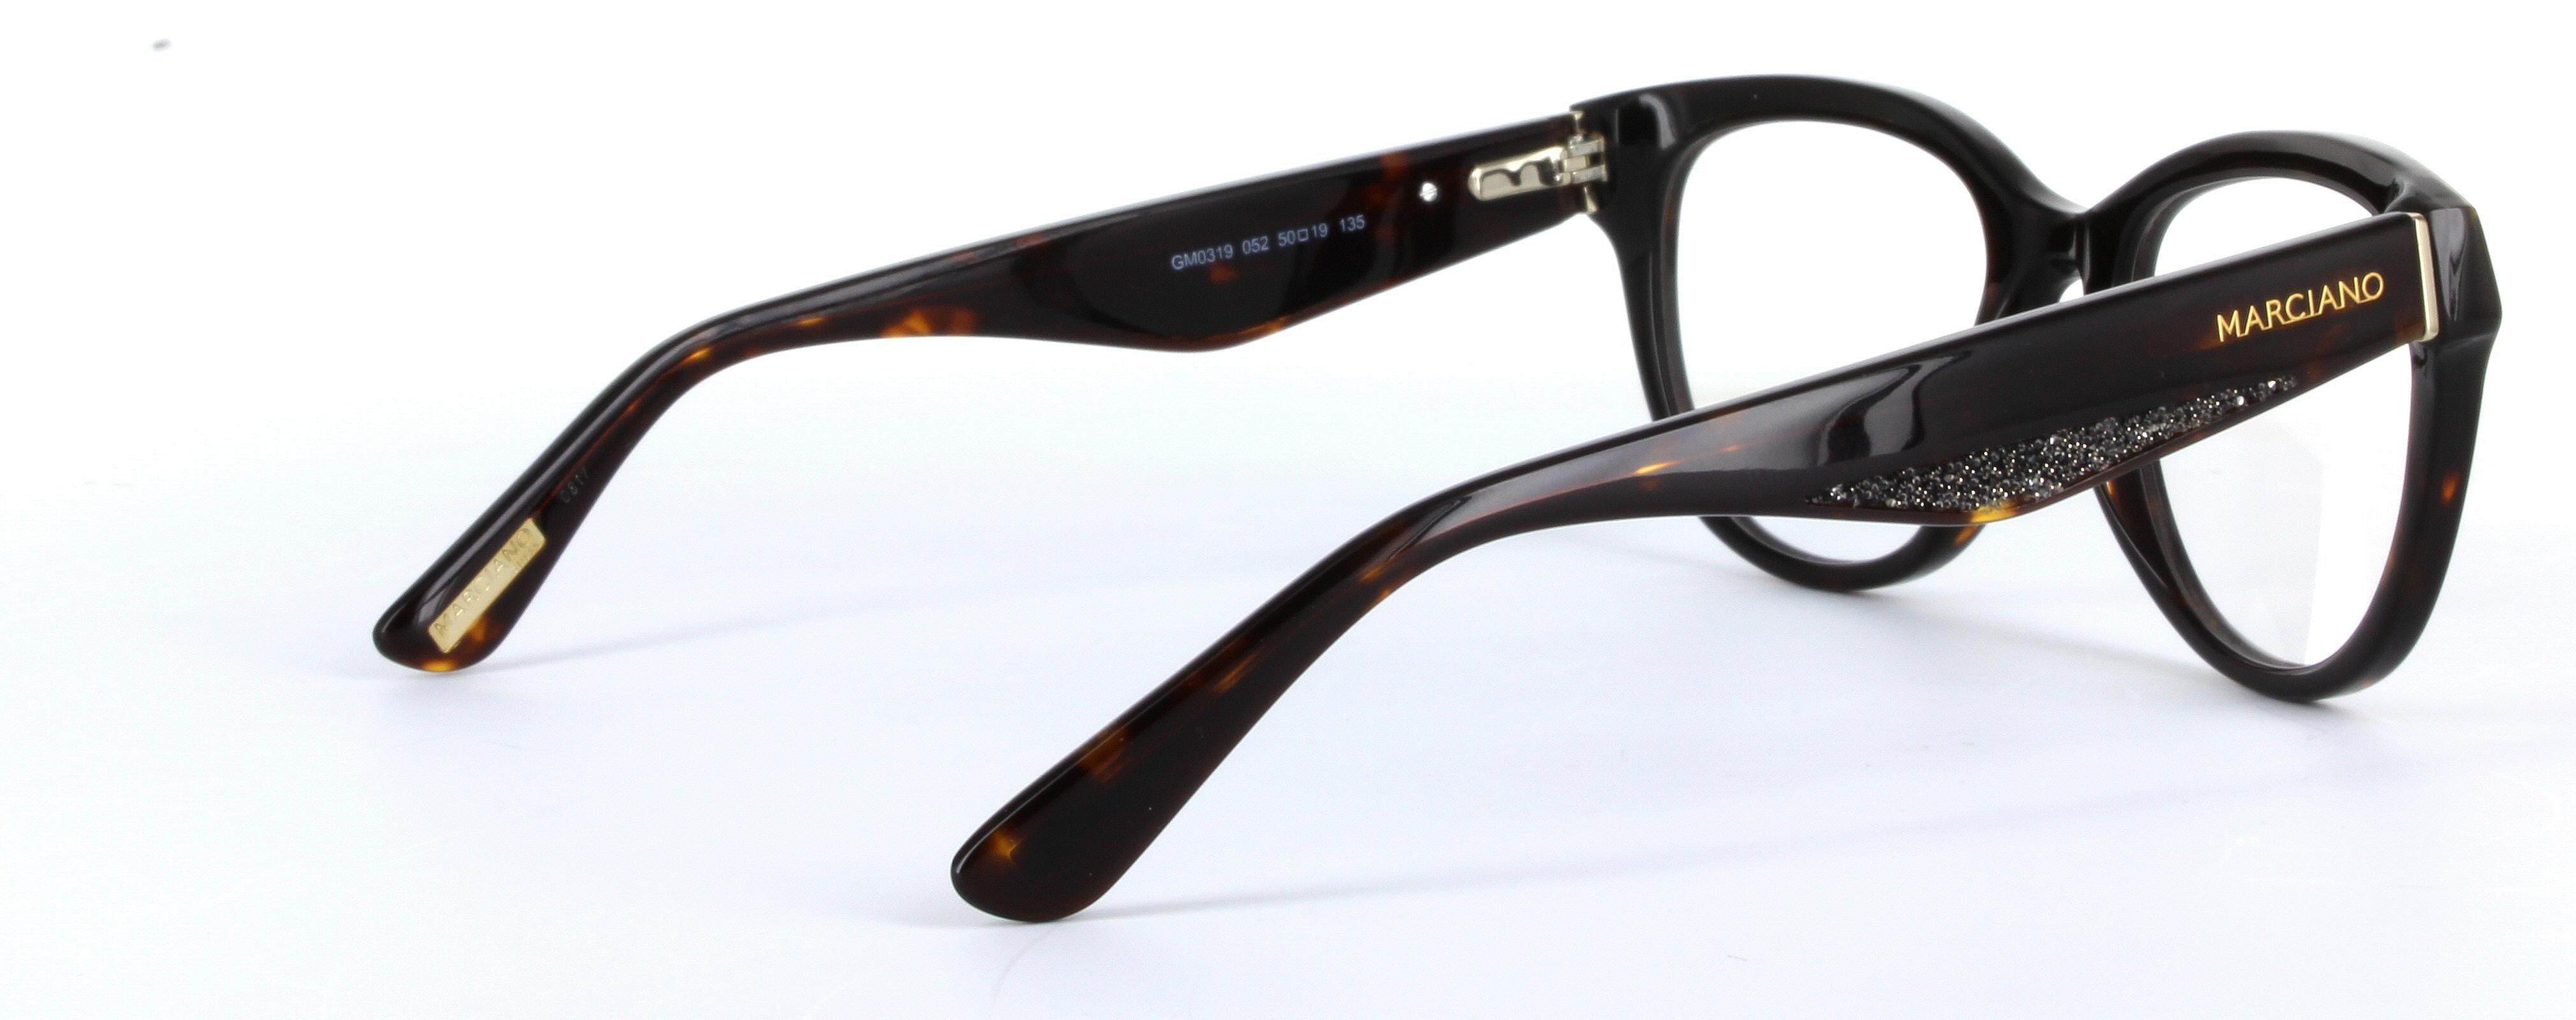 GUESS MARCIANO (GM0319-052) Tortoise Full Rim Oval Acetate Glasses - Image View 4